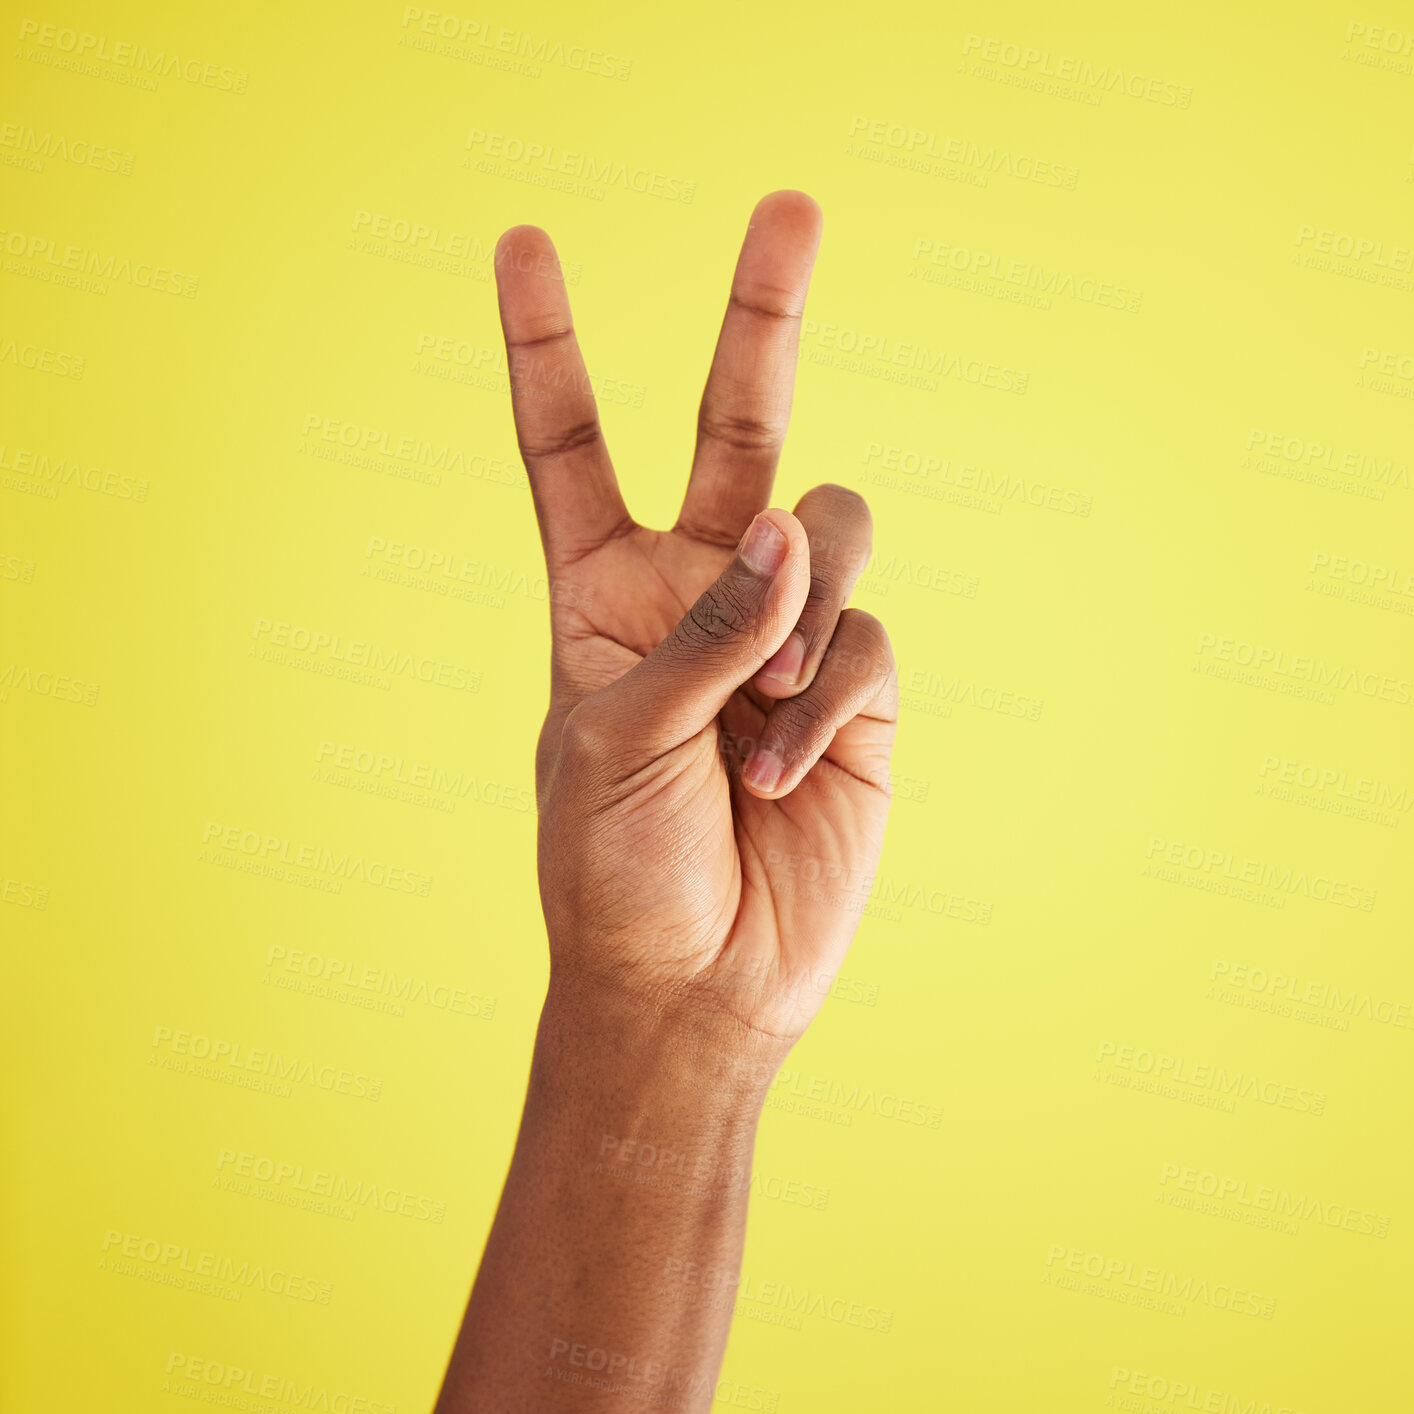 Buy stock photo Studio shot of an unrecognisable man making a peace sign against a yellow background